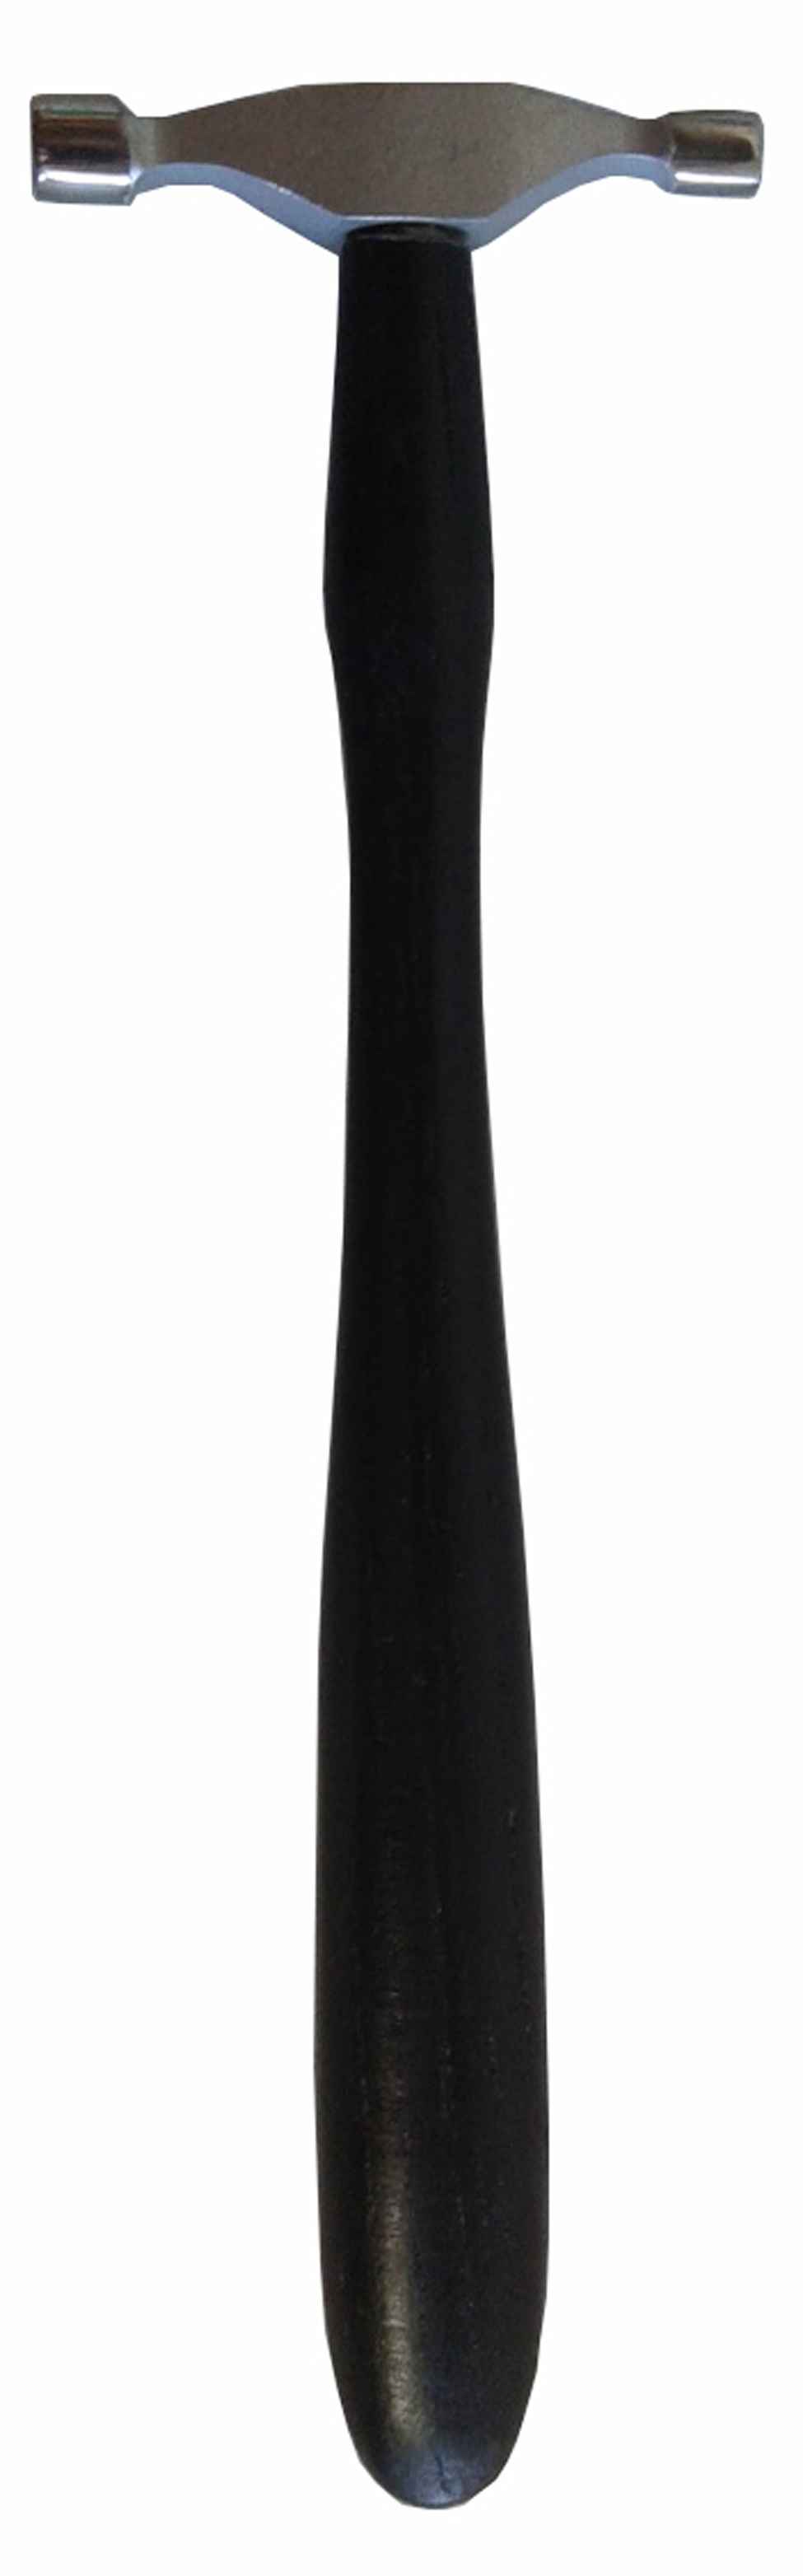 RAWHIDE MALLET 3" DIA length 3 3/8" #5 - Click Image to Close